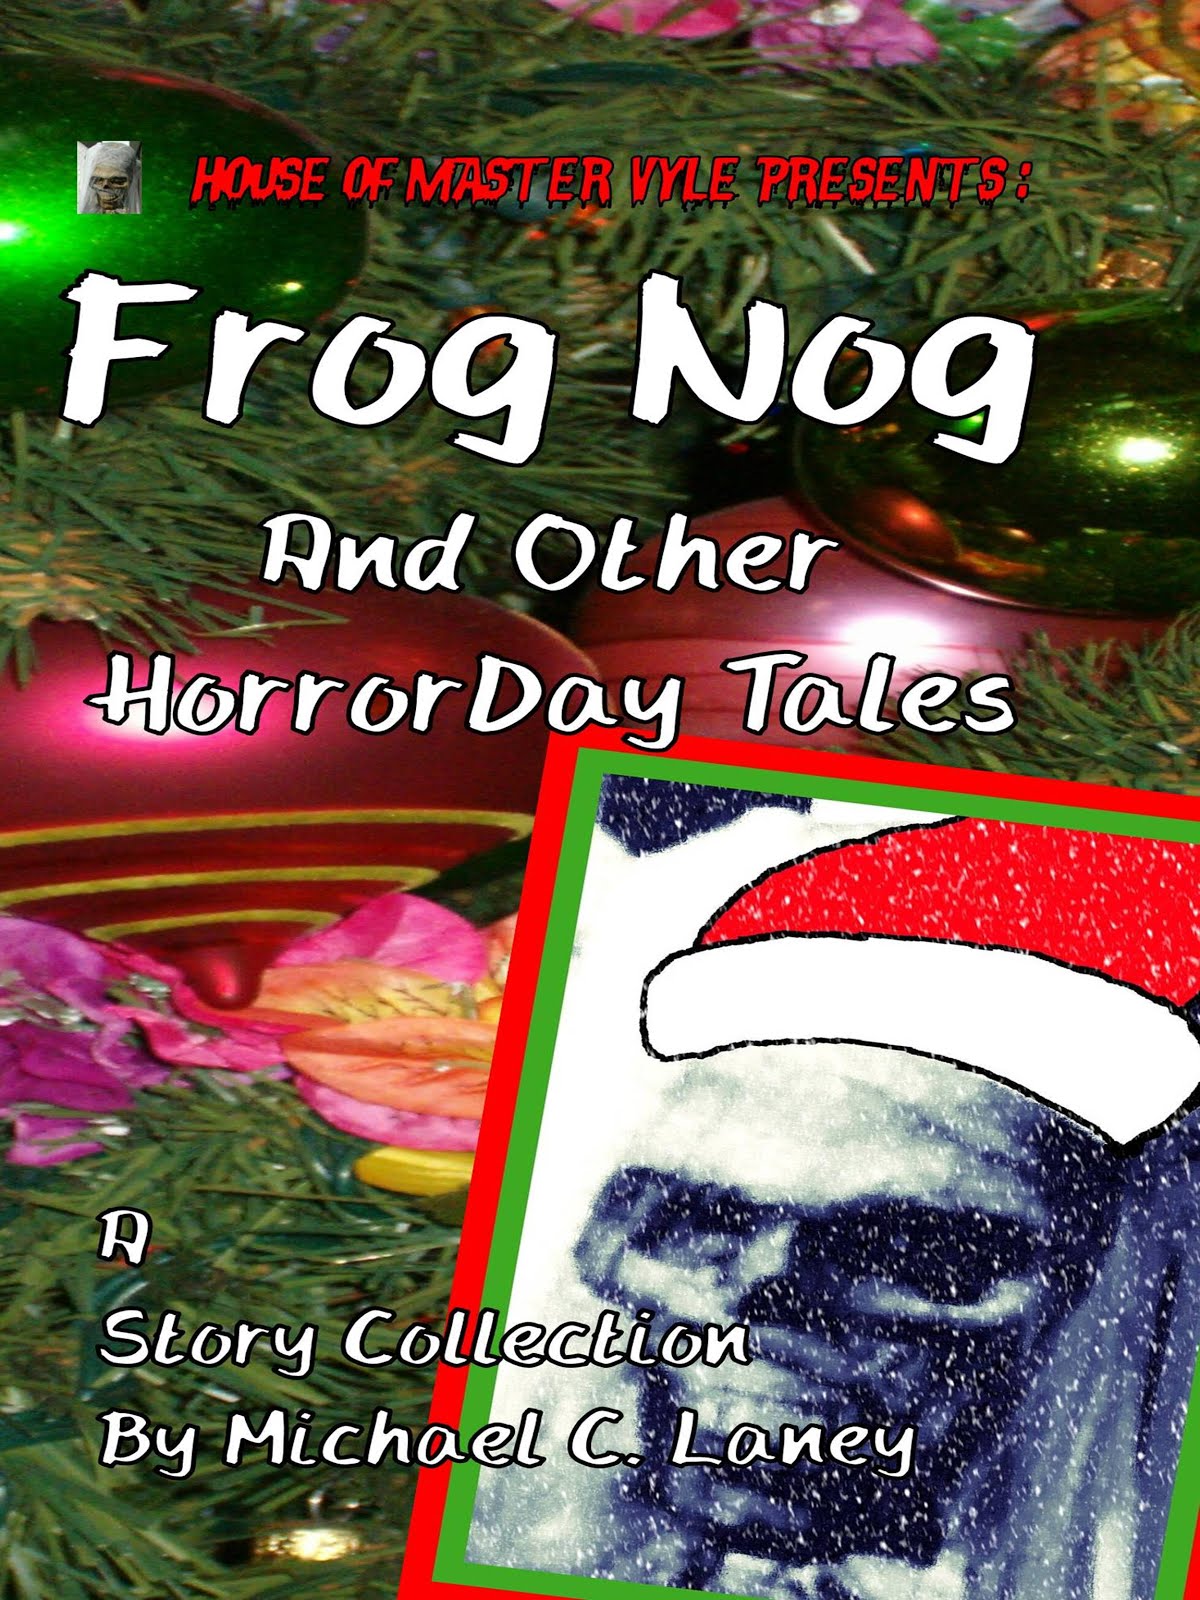 Frog Nog and Other HorrorDay Tales